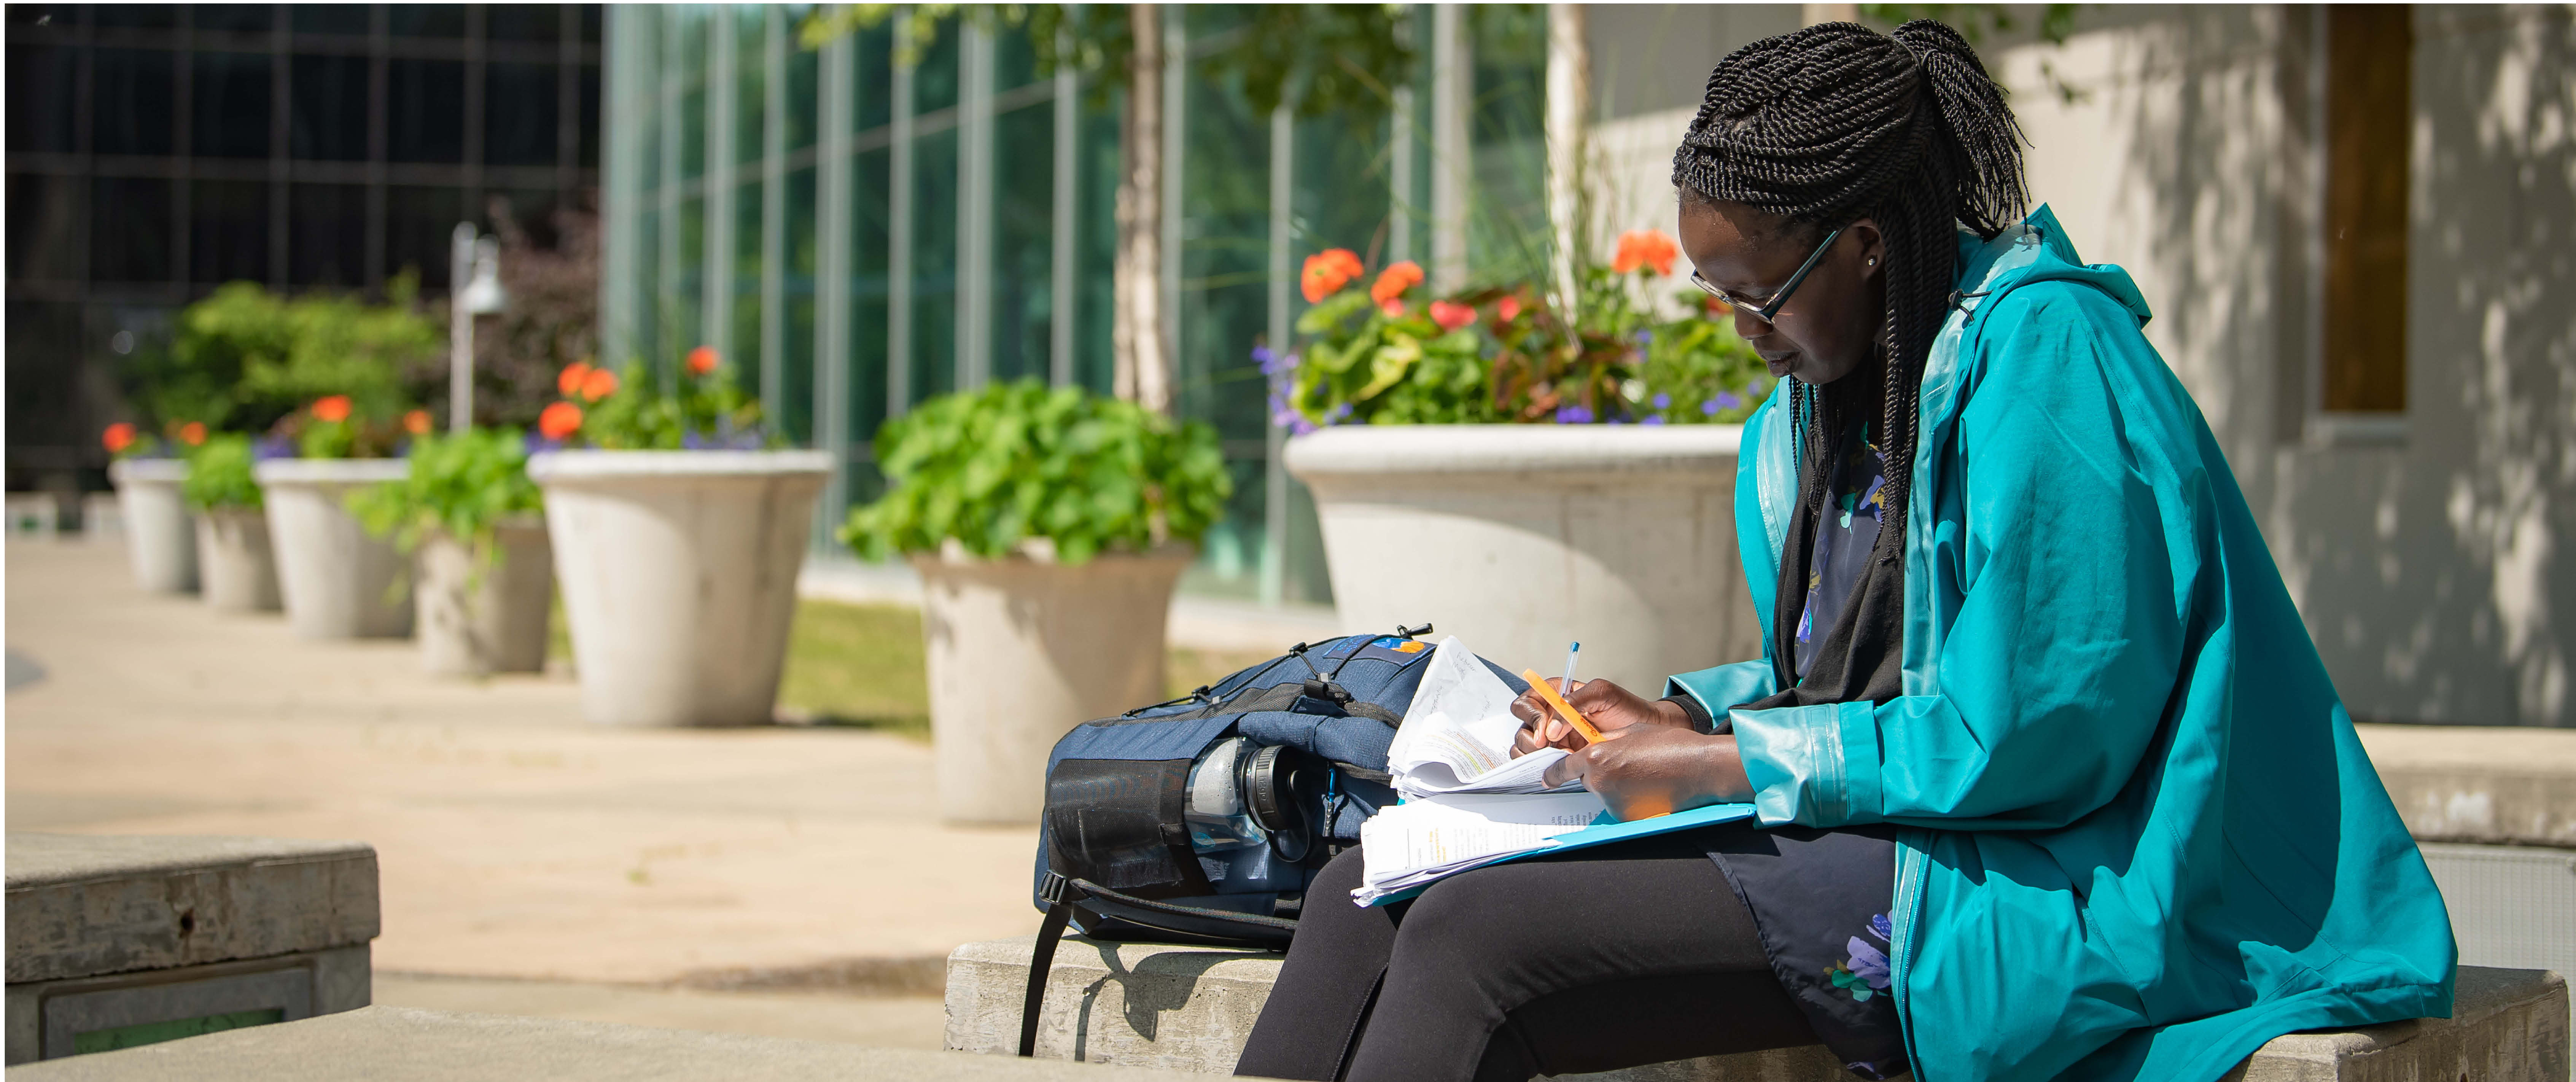 Studying student outside on bench